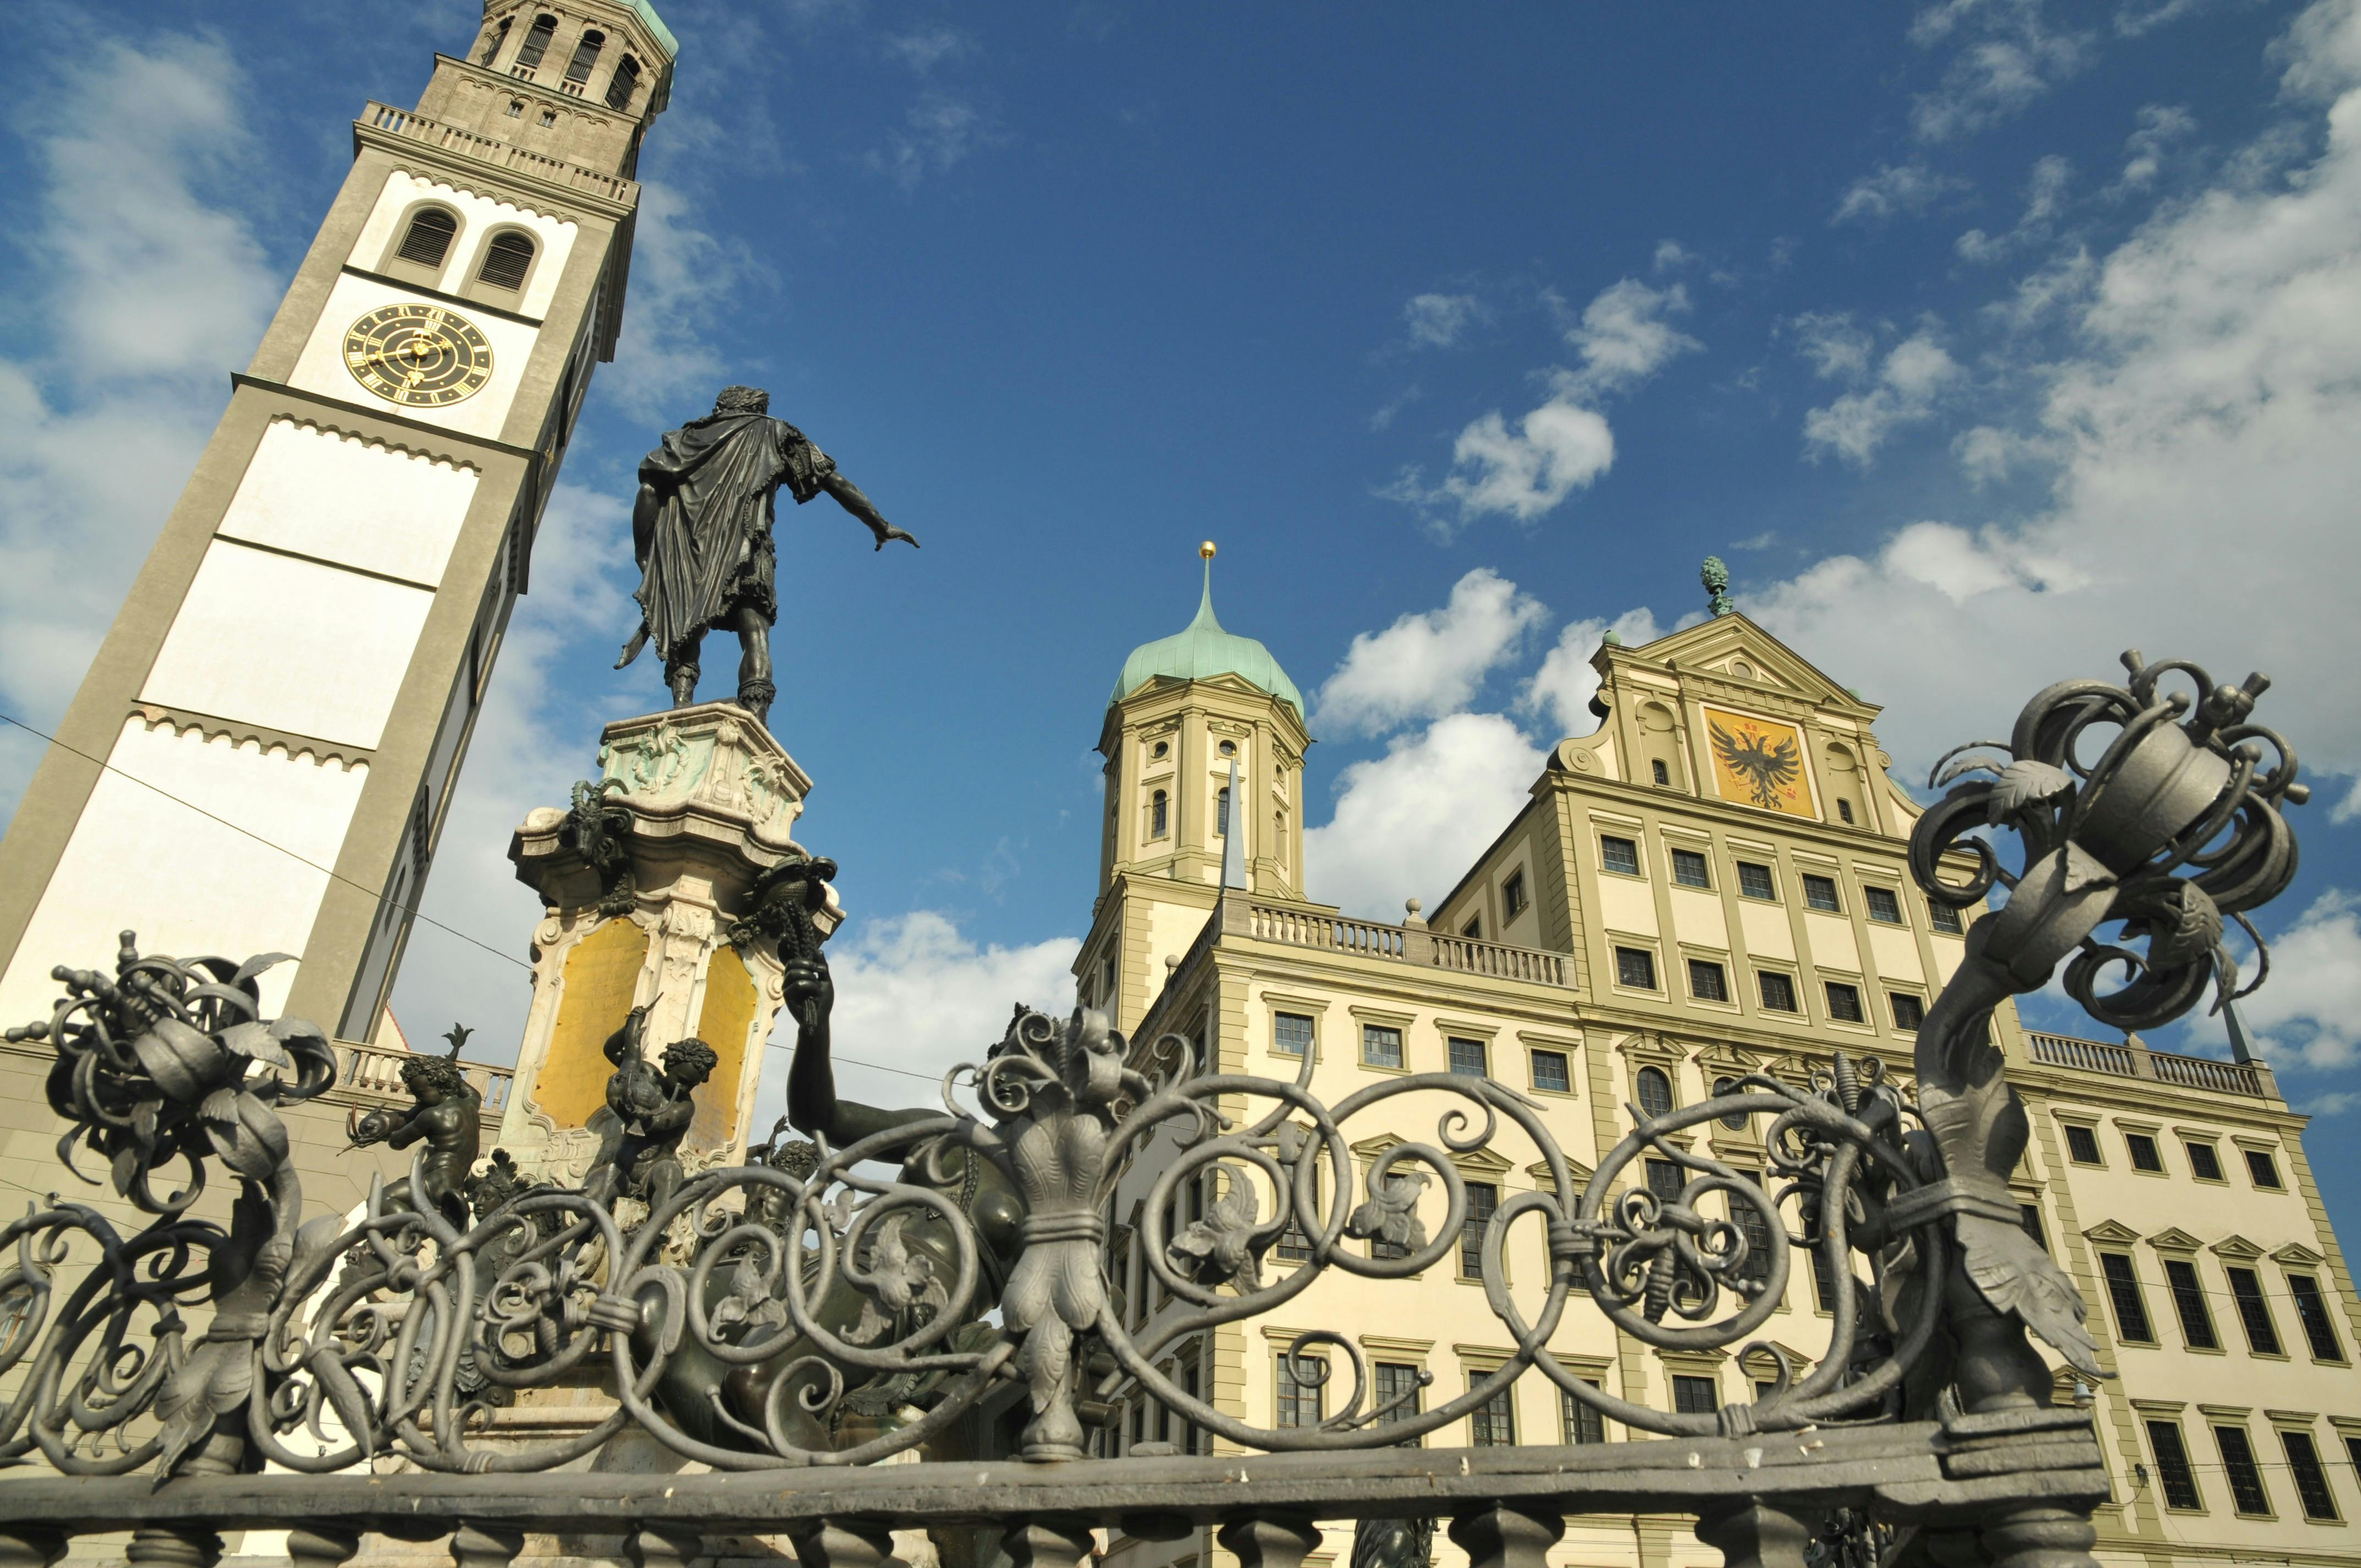 Augsburg city tour in the footsteps of Fugger, Mozart and Brecht